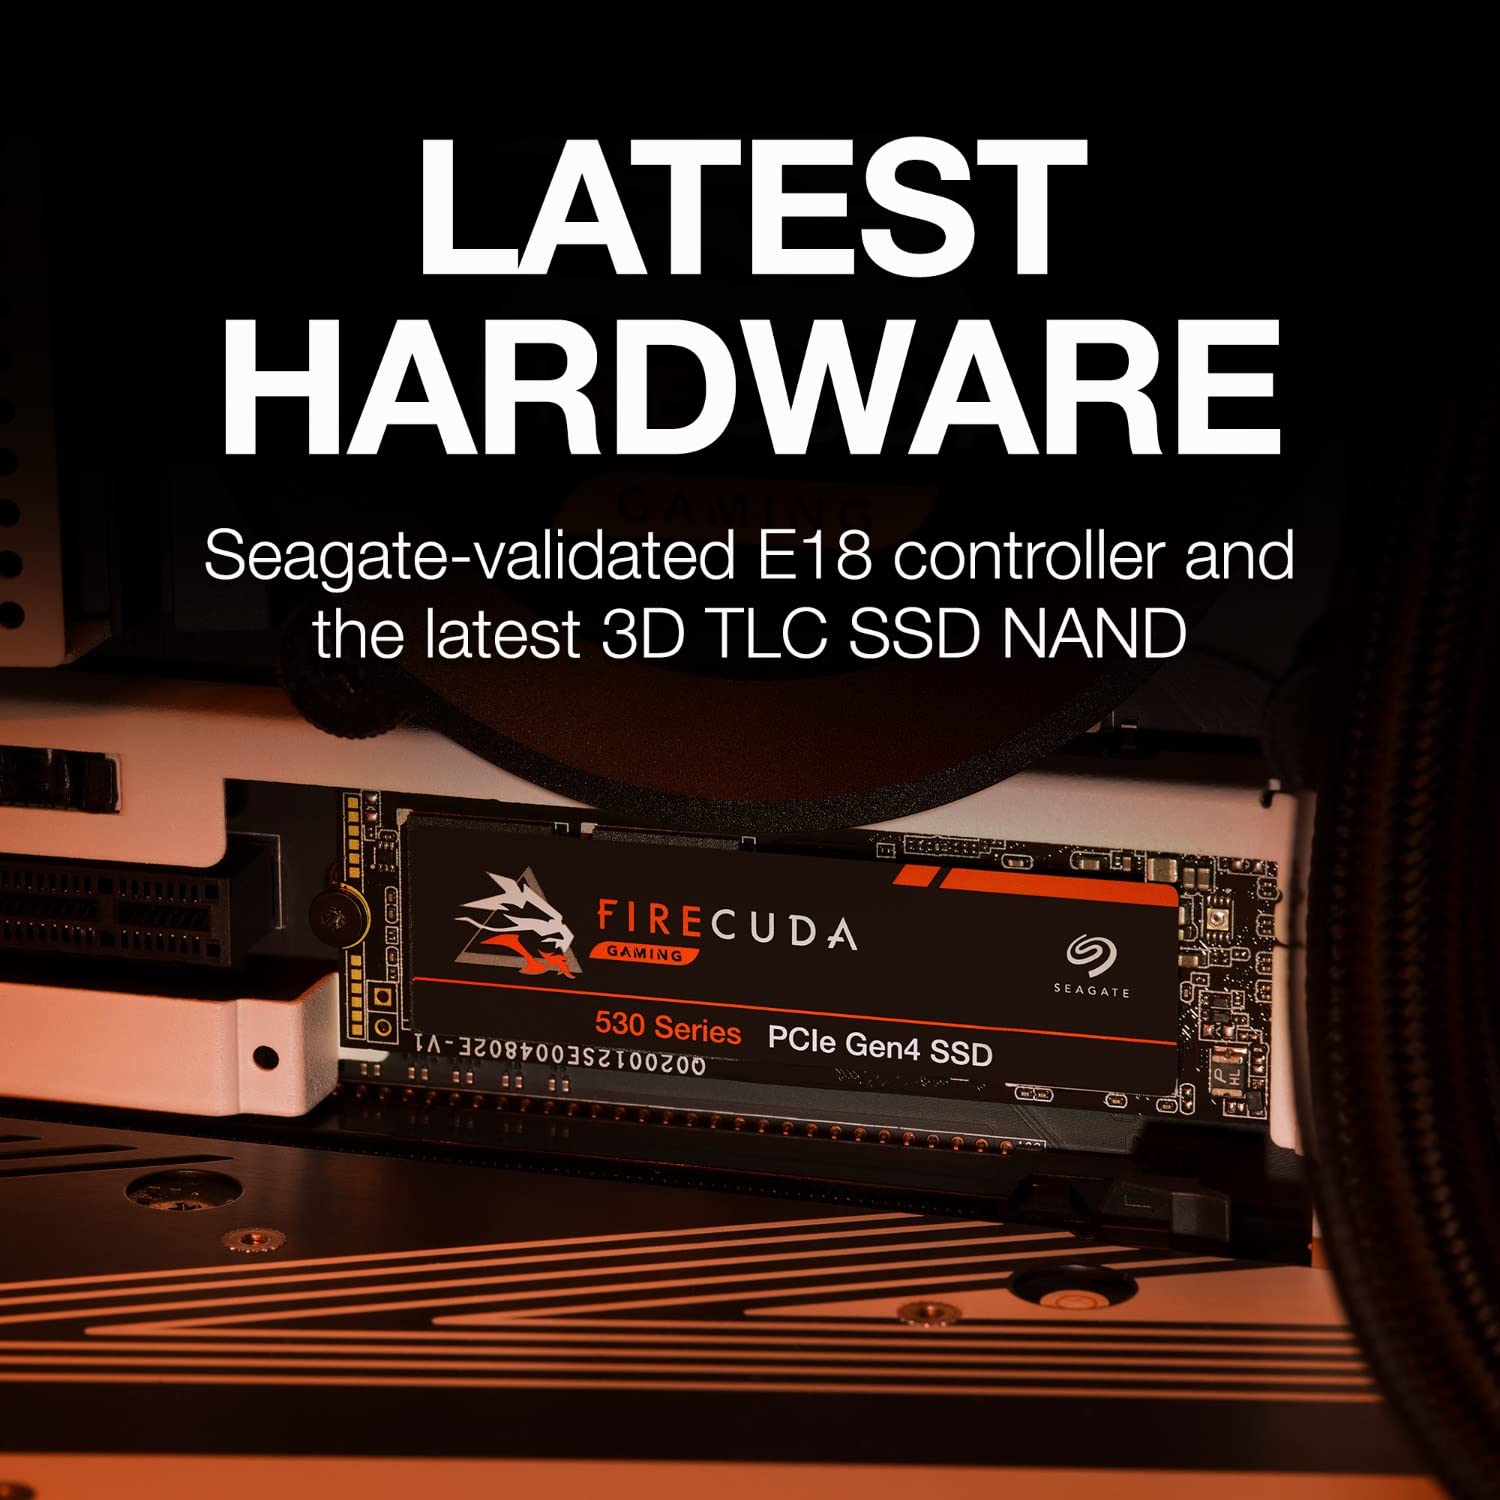 Seagate FireCuda 530 1TB Internal Solid State Drive - M.2 PCIe Gen4 ×4 NVMe 1.4, Transfer speeds up to 7300 MB/s,